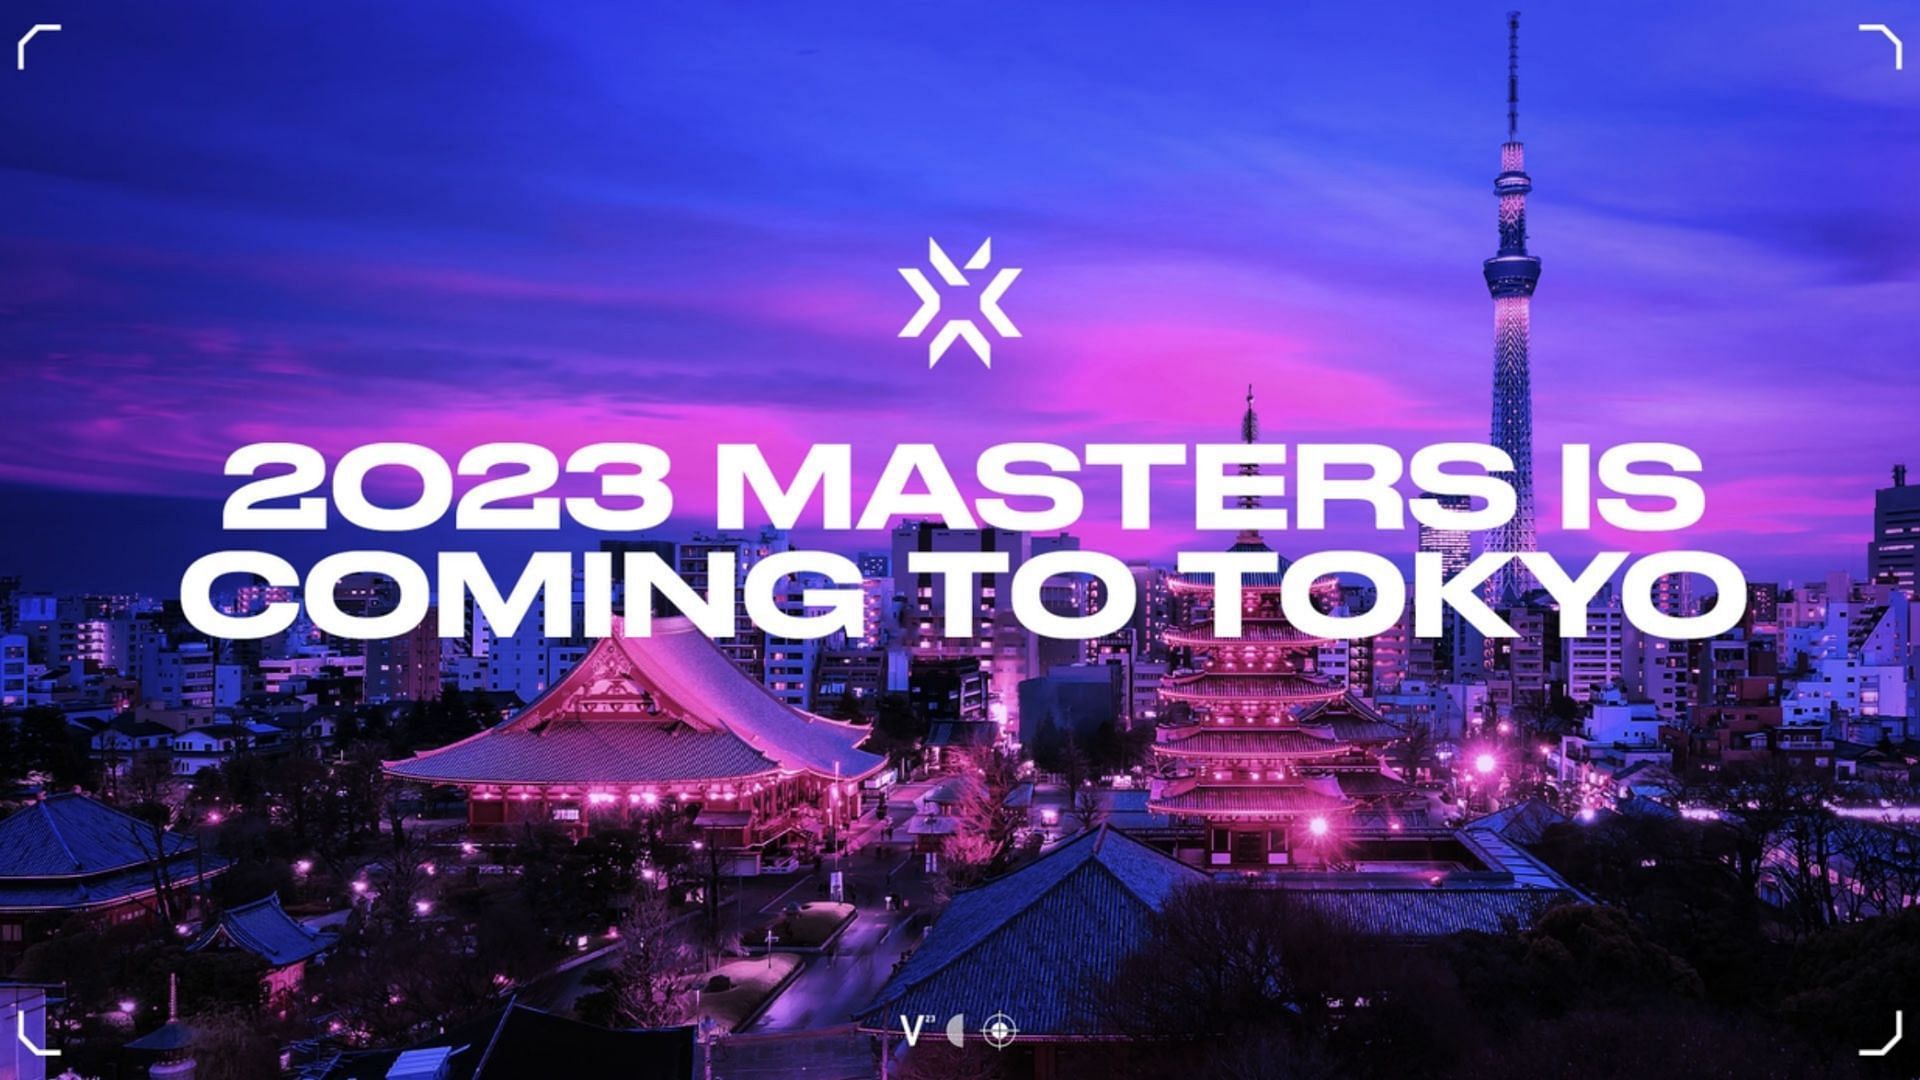 Valorant Masters 2023 is going to be held in Tokyo